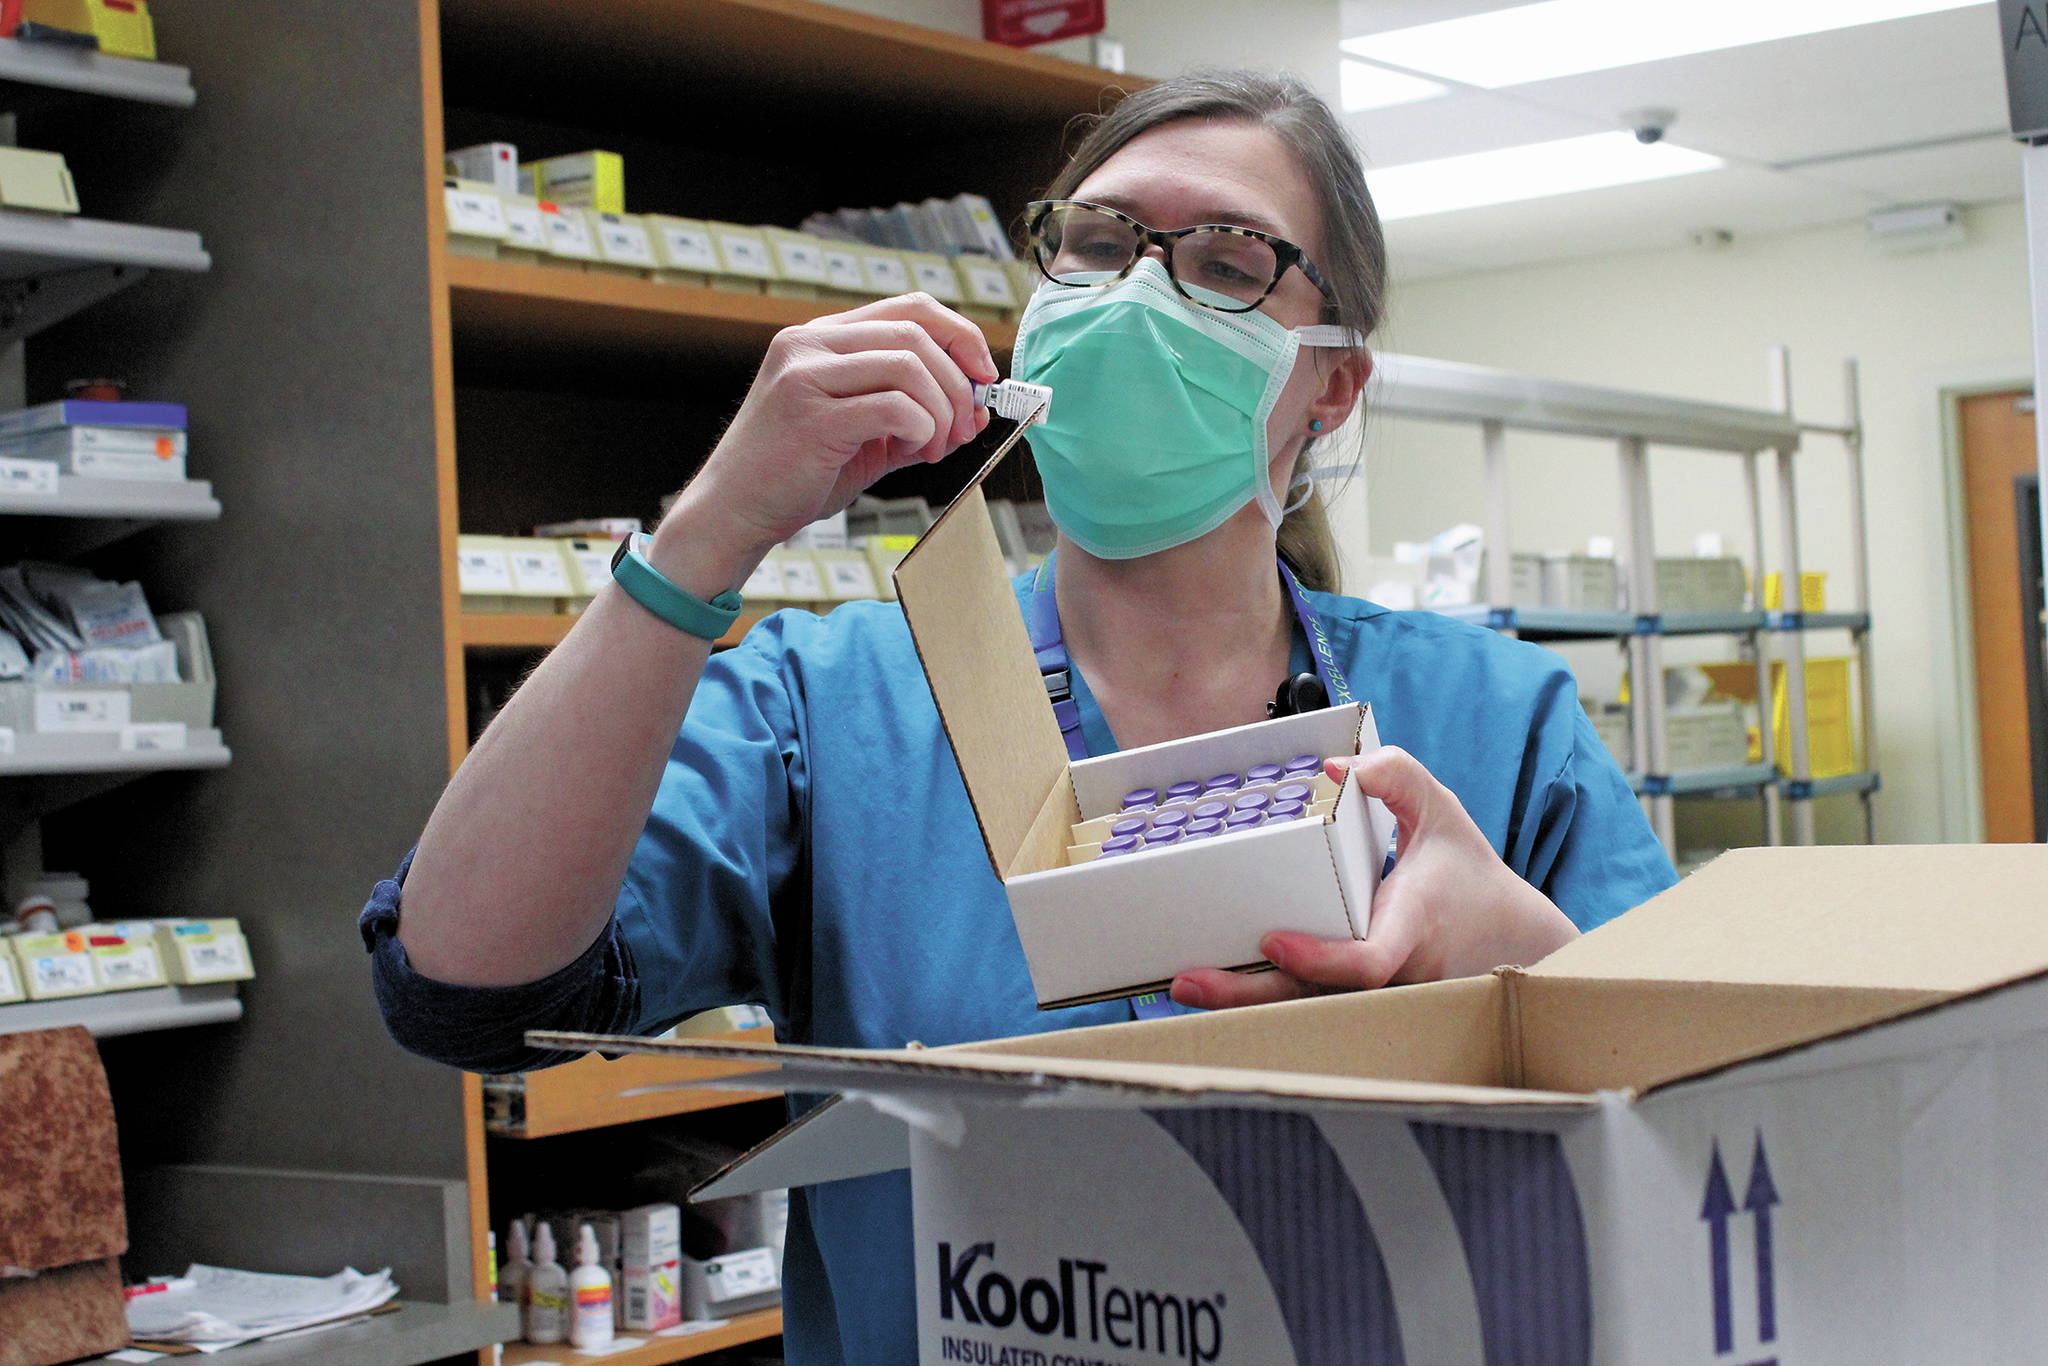 South Peninsula Pharmacist Jill Kort examines a vial of the Pfizer vaccine for COVID-19 shortly after it arrived at the hospital on Wednesday, Dec. 16, 2020 in Homer, Alaska. (Photo by Megan Pacer/Homer News)